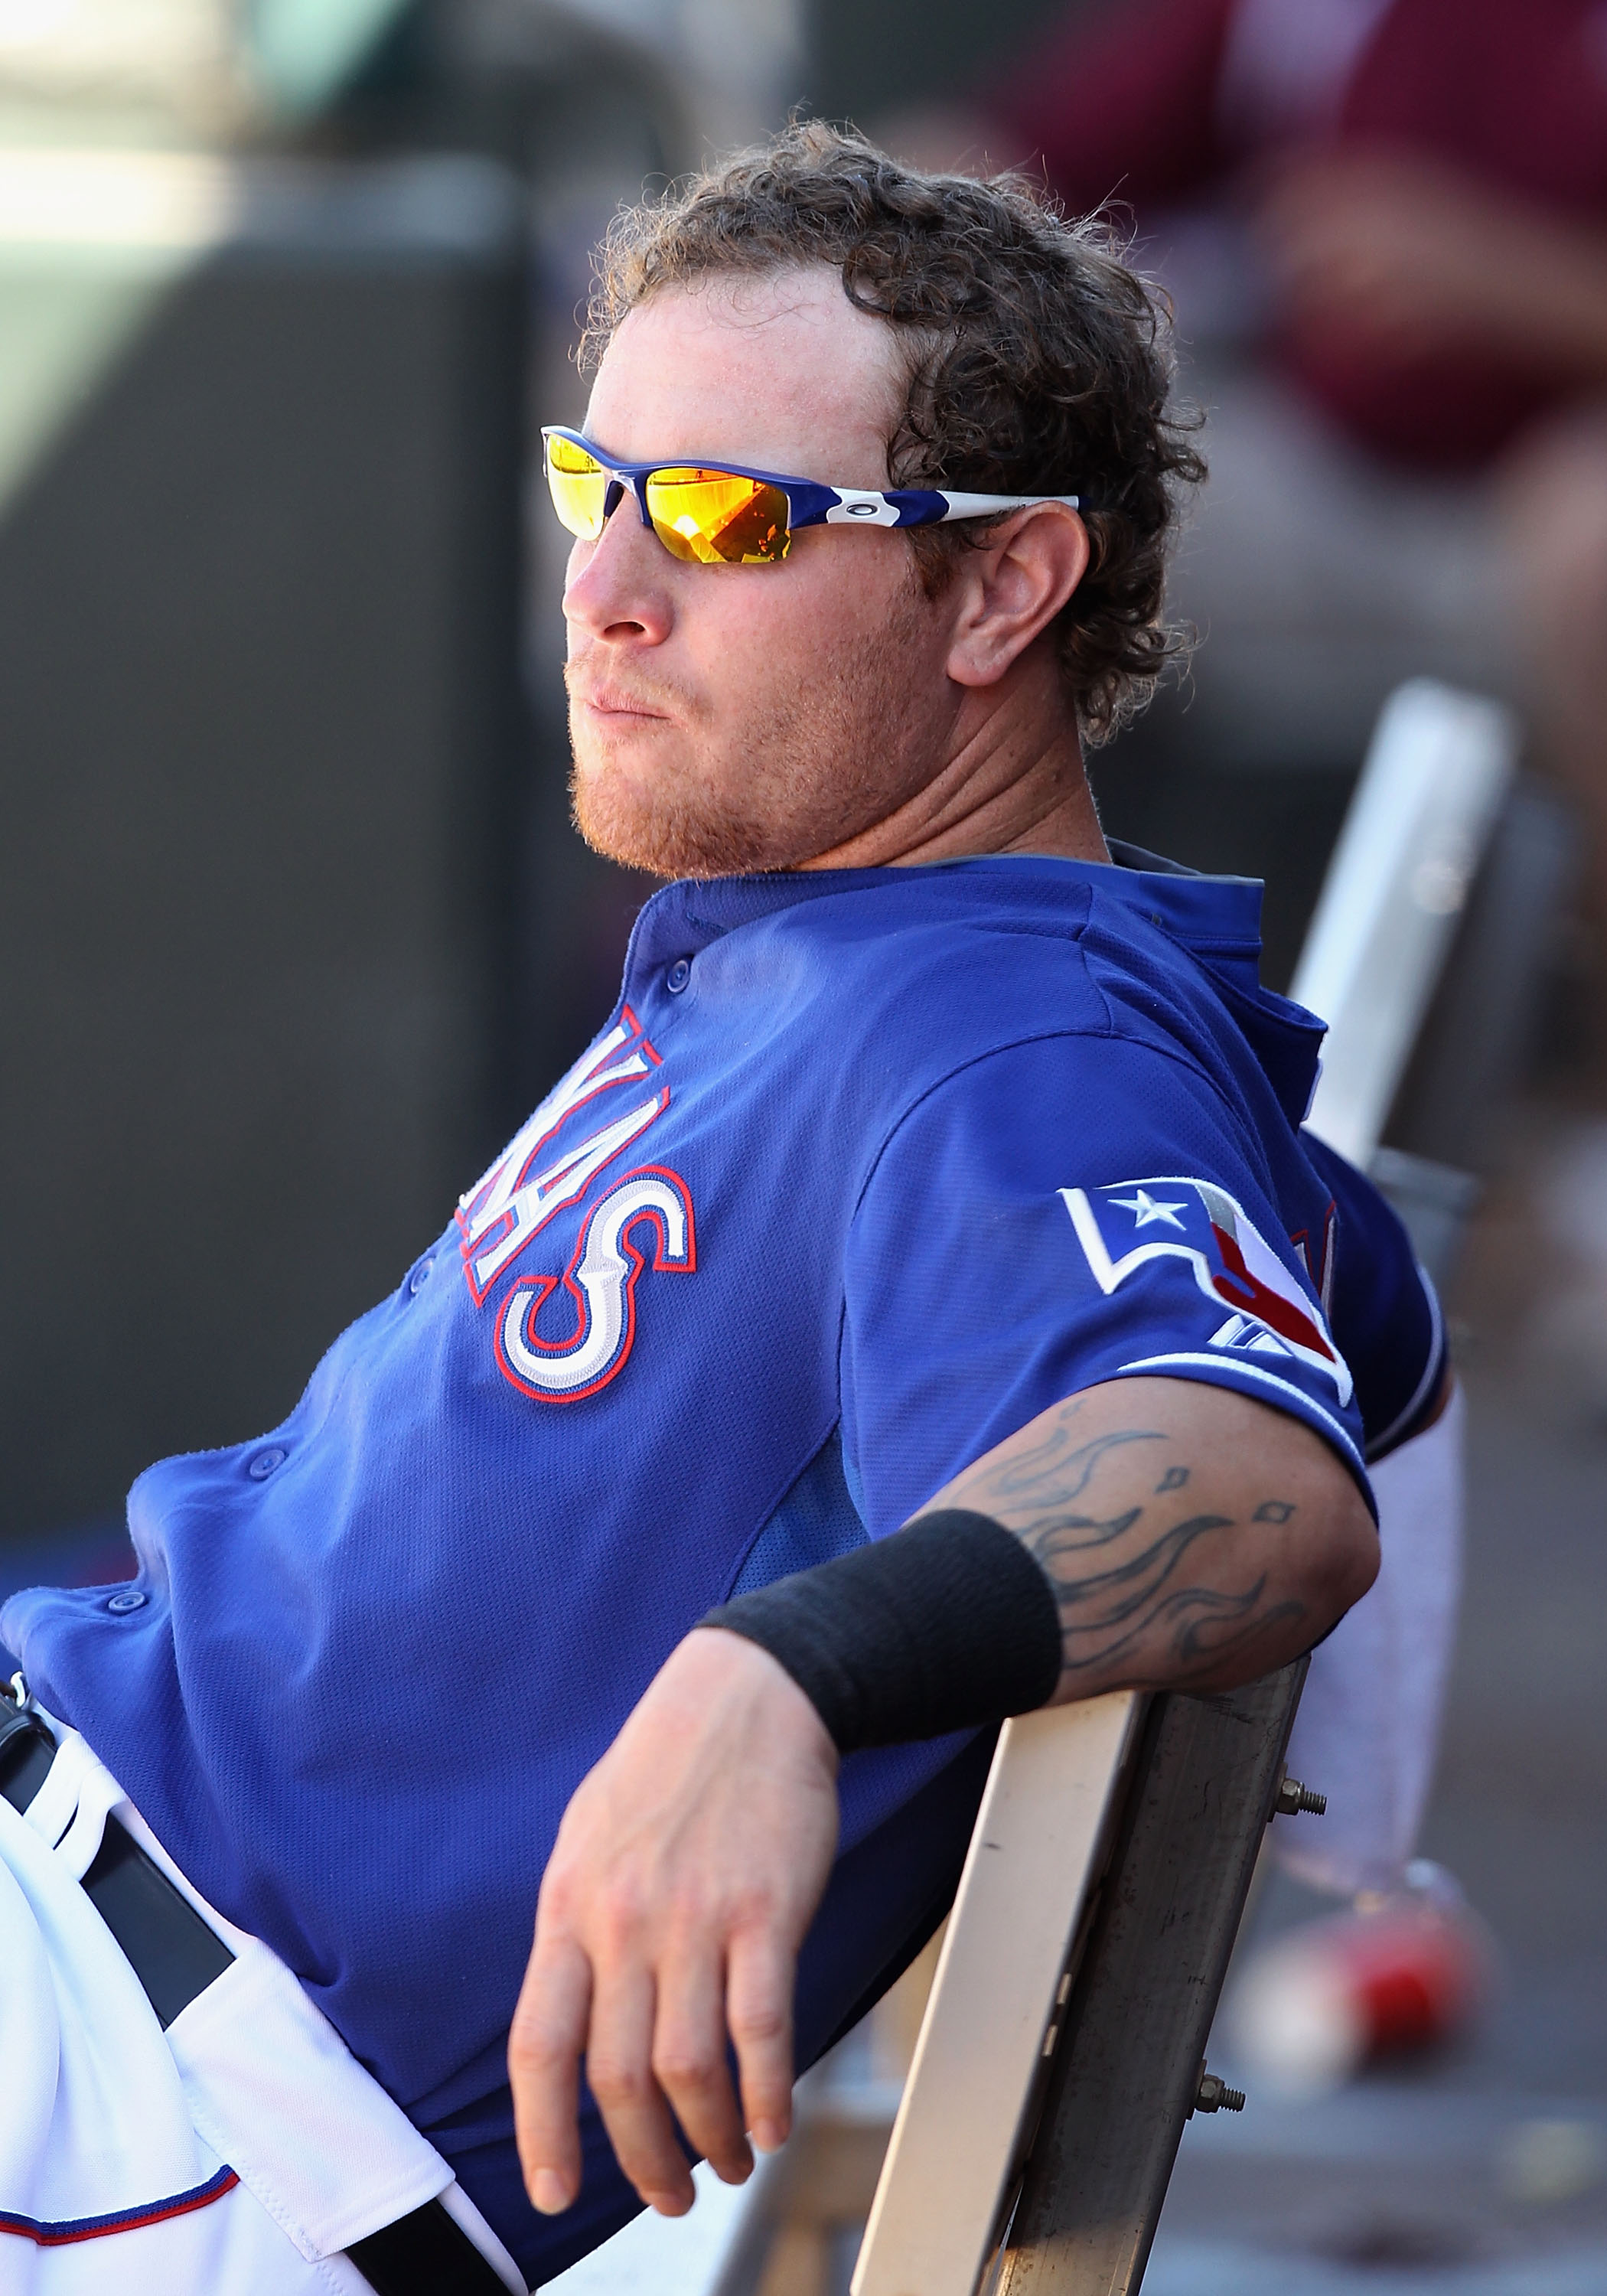 SURPRISE, AZ - MARCH 11:  Josh Hamilton #32 of the Texas Rangers sits in the dugout during the spring training game against the Cincinnati Reds at Surprise Stadium on March 11, 2011 in Surprise, Arizona.  (Photo by Christian Petersen/Getty Images)